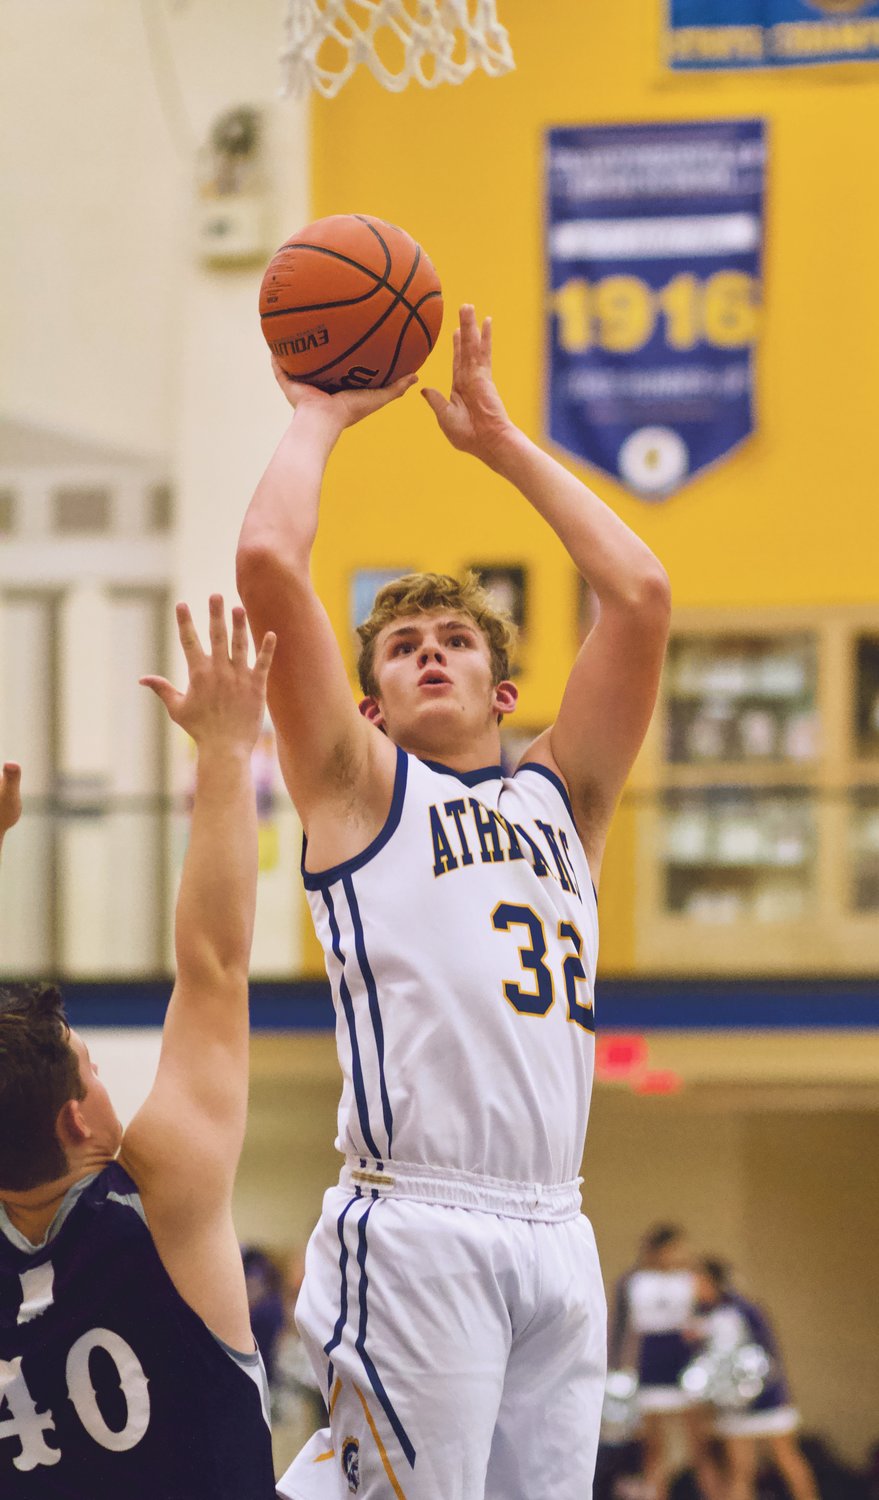 Crawfordsville's Nate Schroeter looks to score for the Athenians.